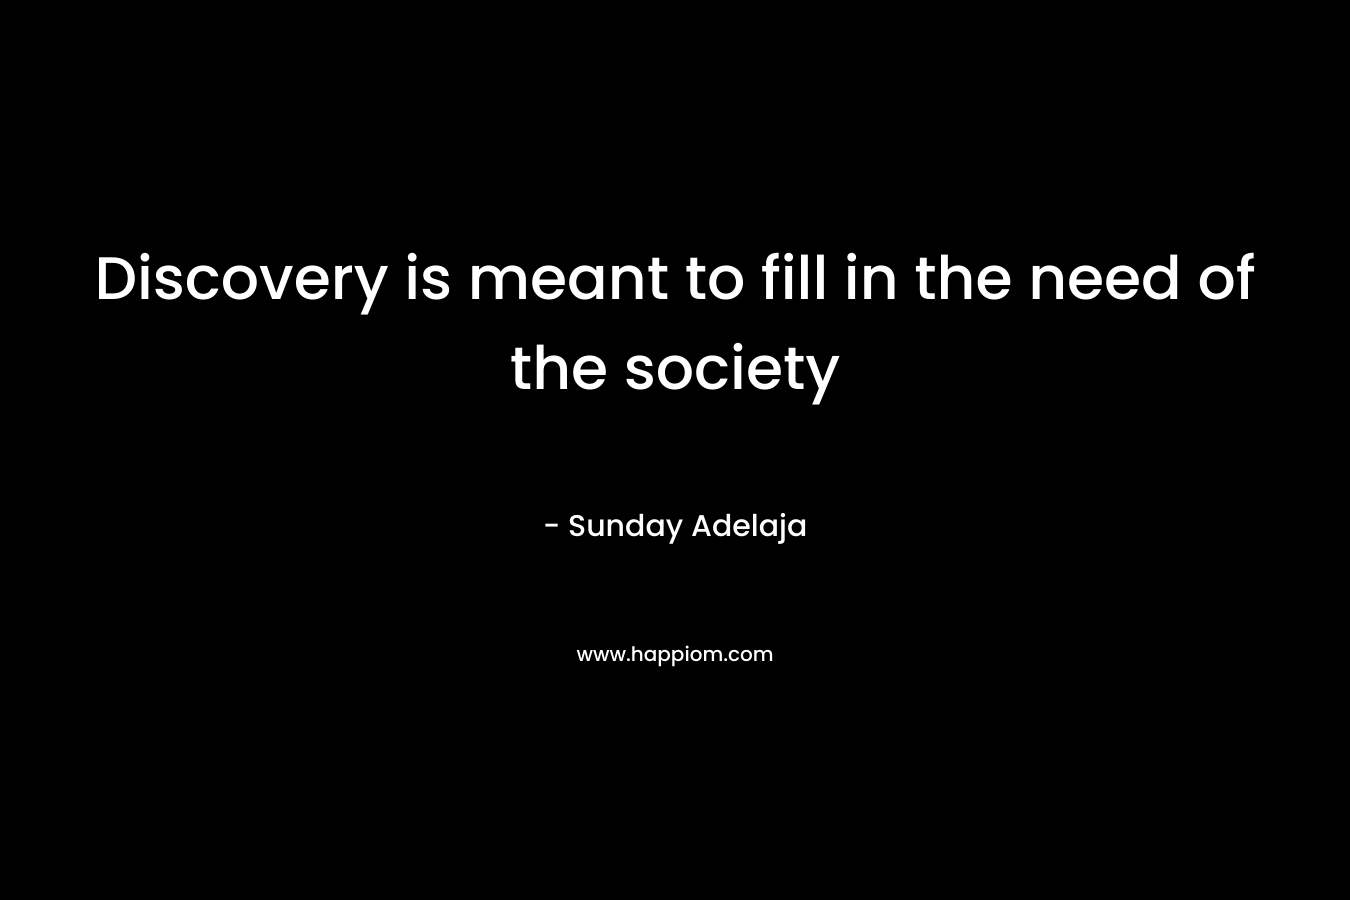 Discovery is meant to fill in the need of the society